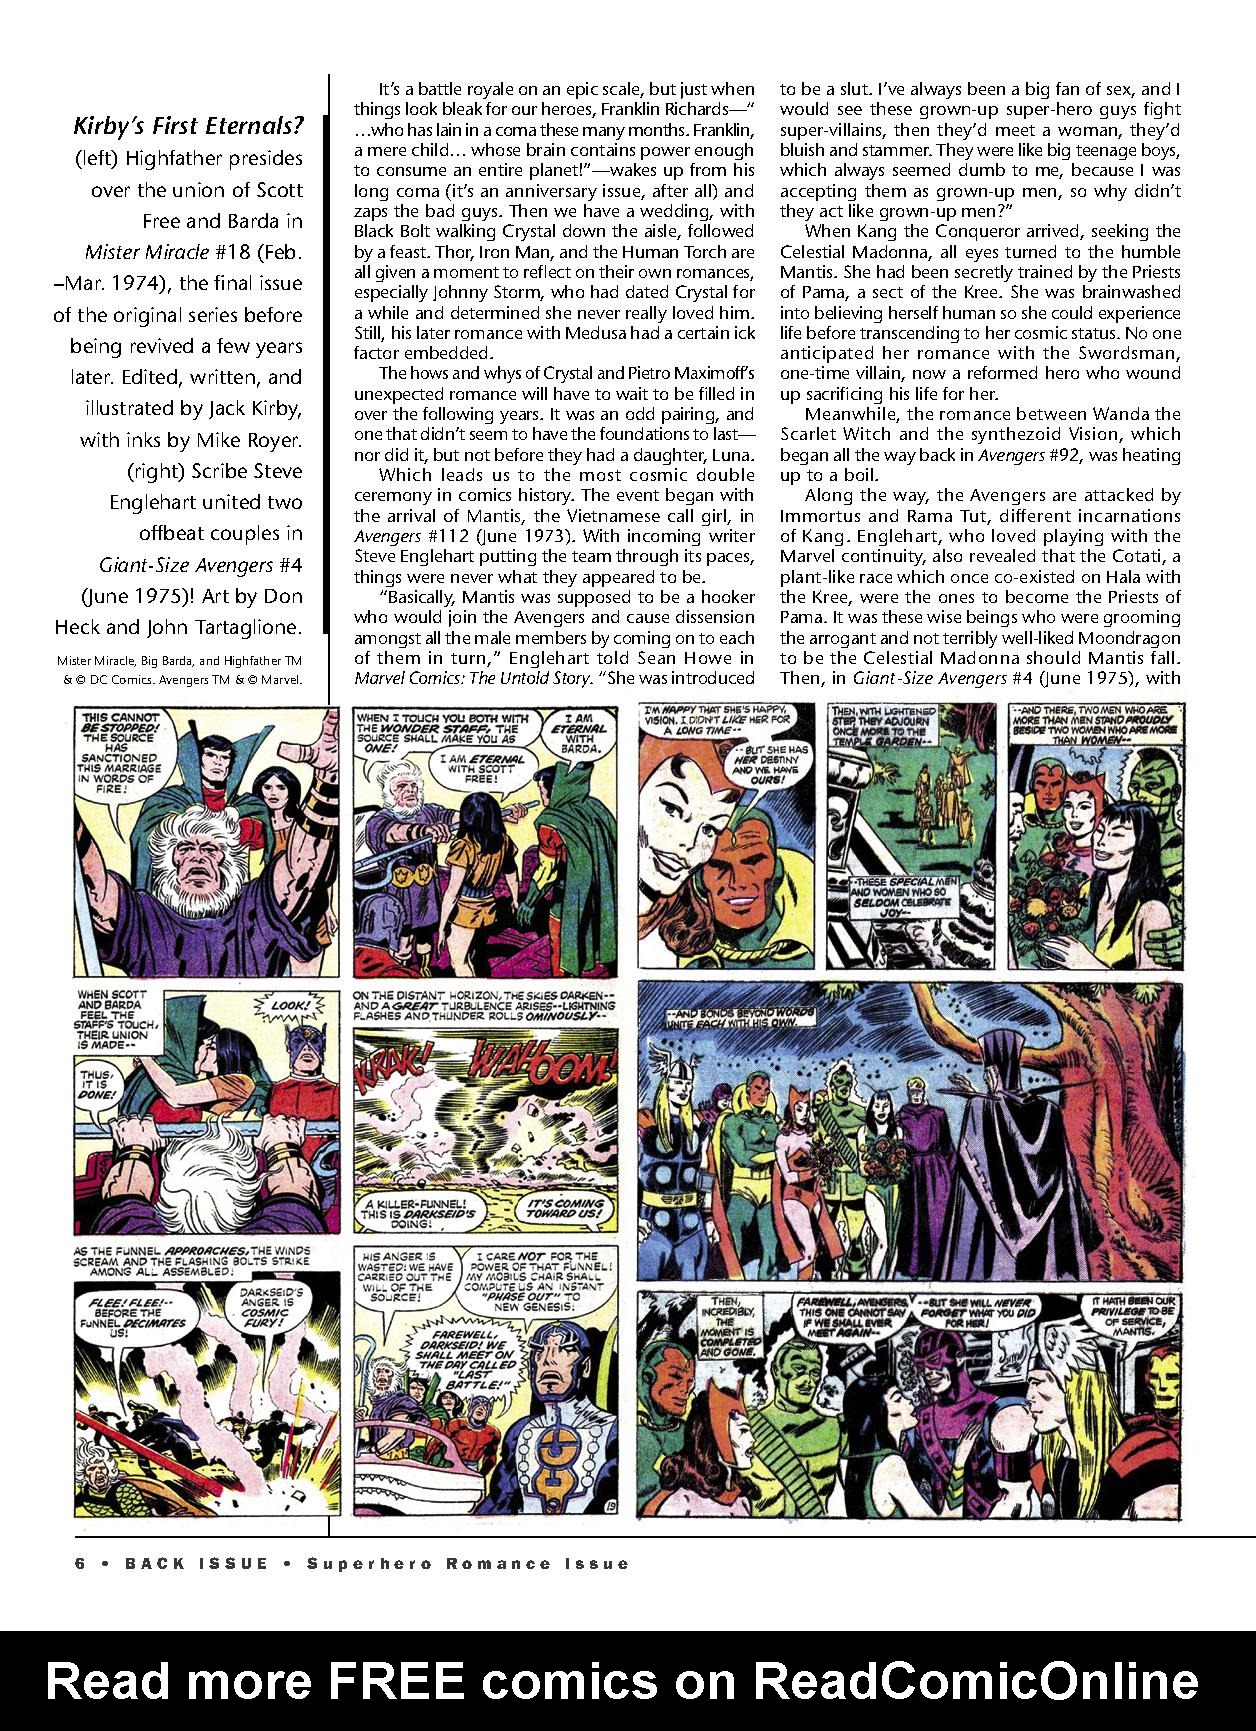 Read online Back Issue comic -  Issue #123 - 8